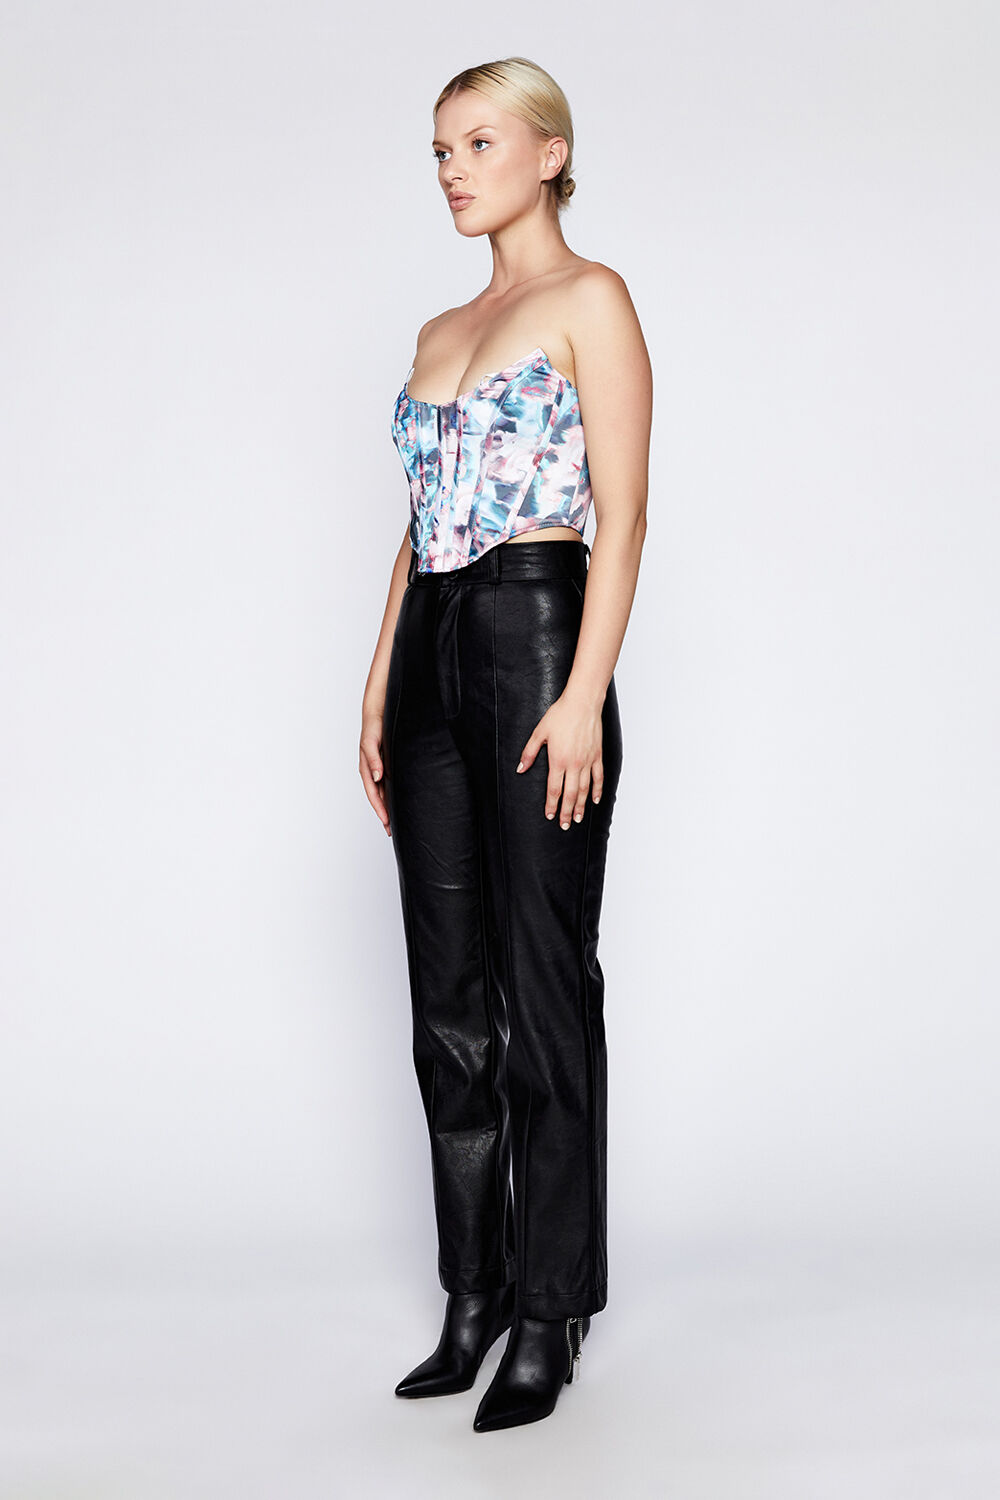 CLEO VEGAN LEATHER PANT in colour CAVIAR